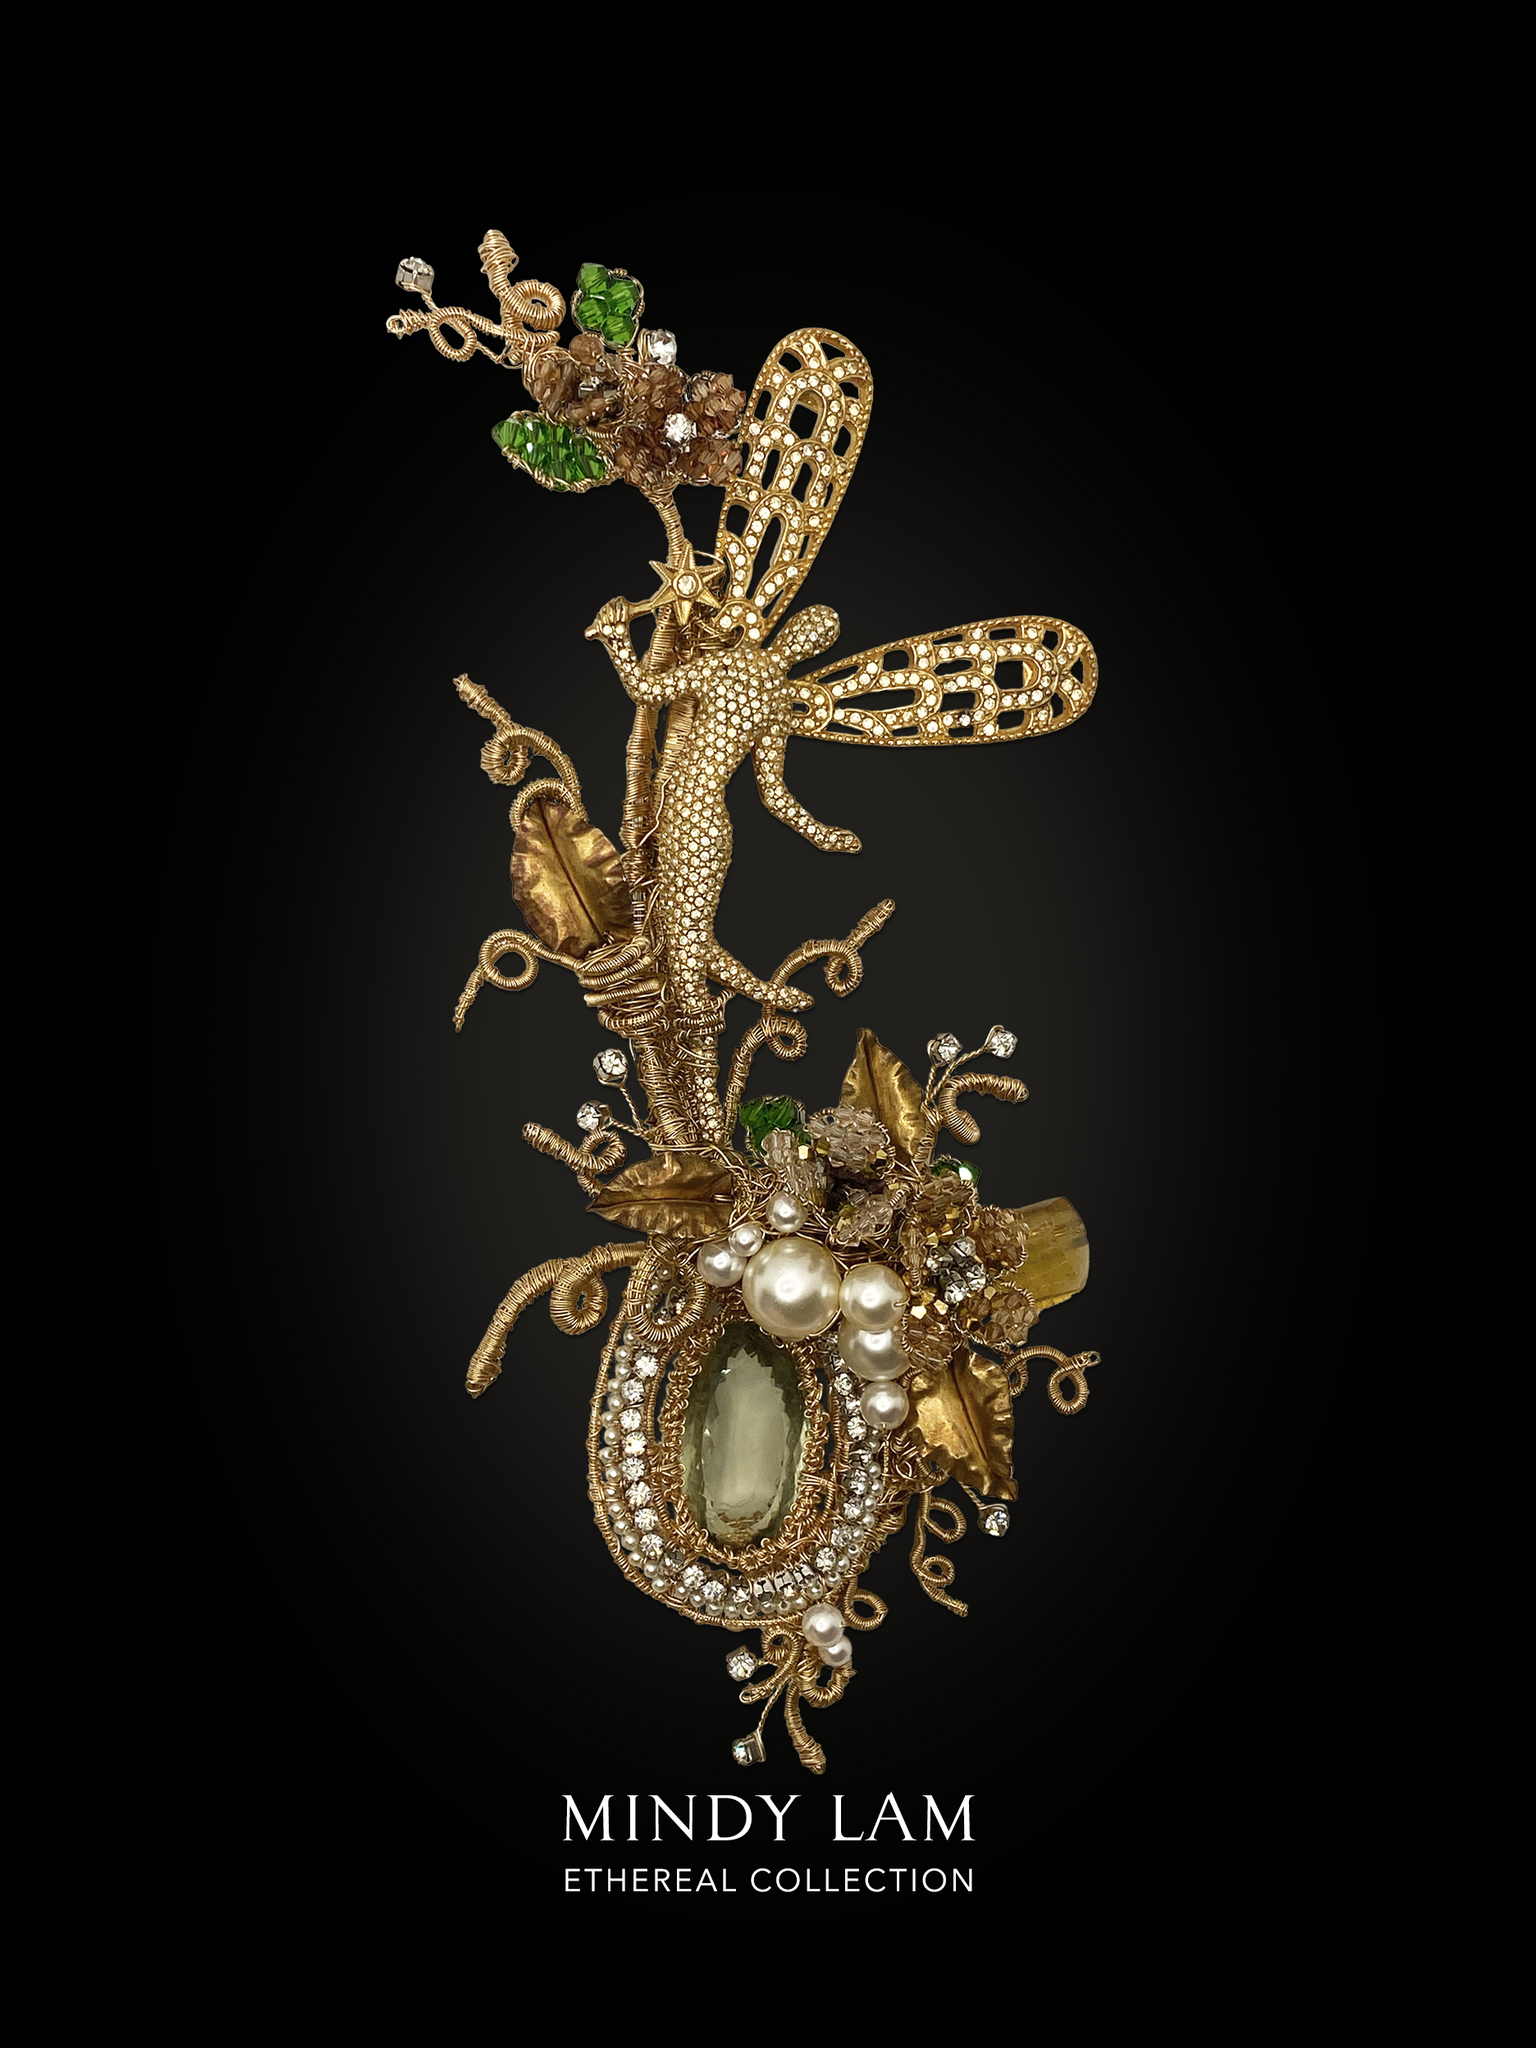 Ethereal Collection Lapel Pin - Enchantment of the Forest